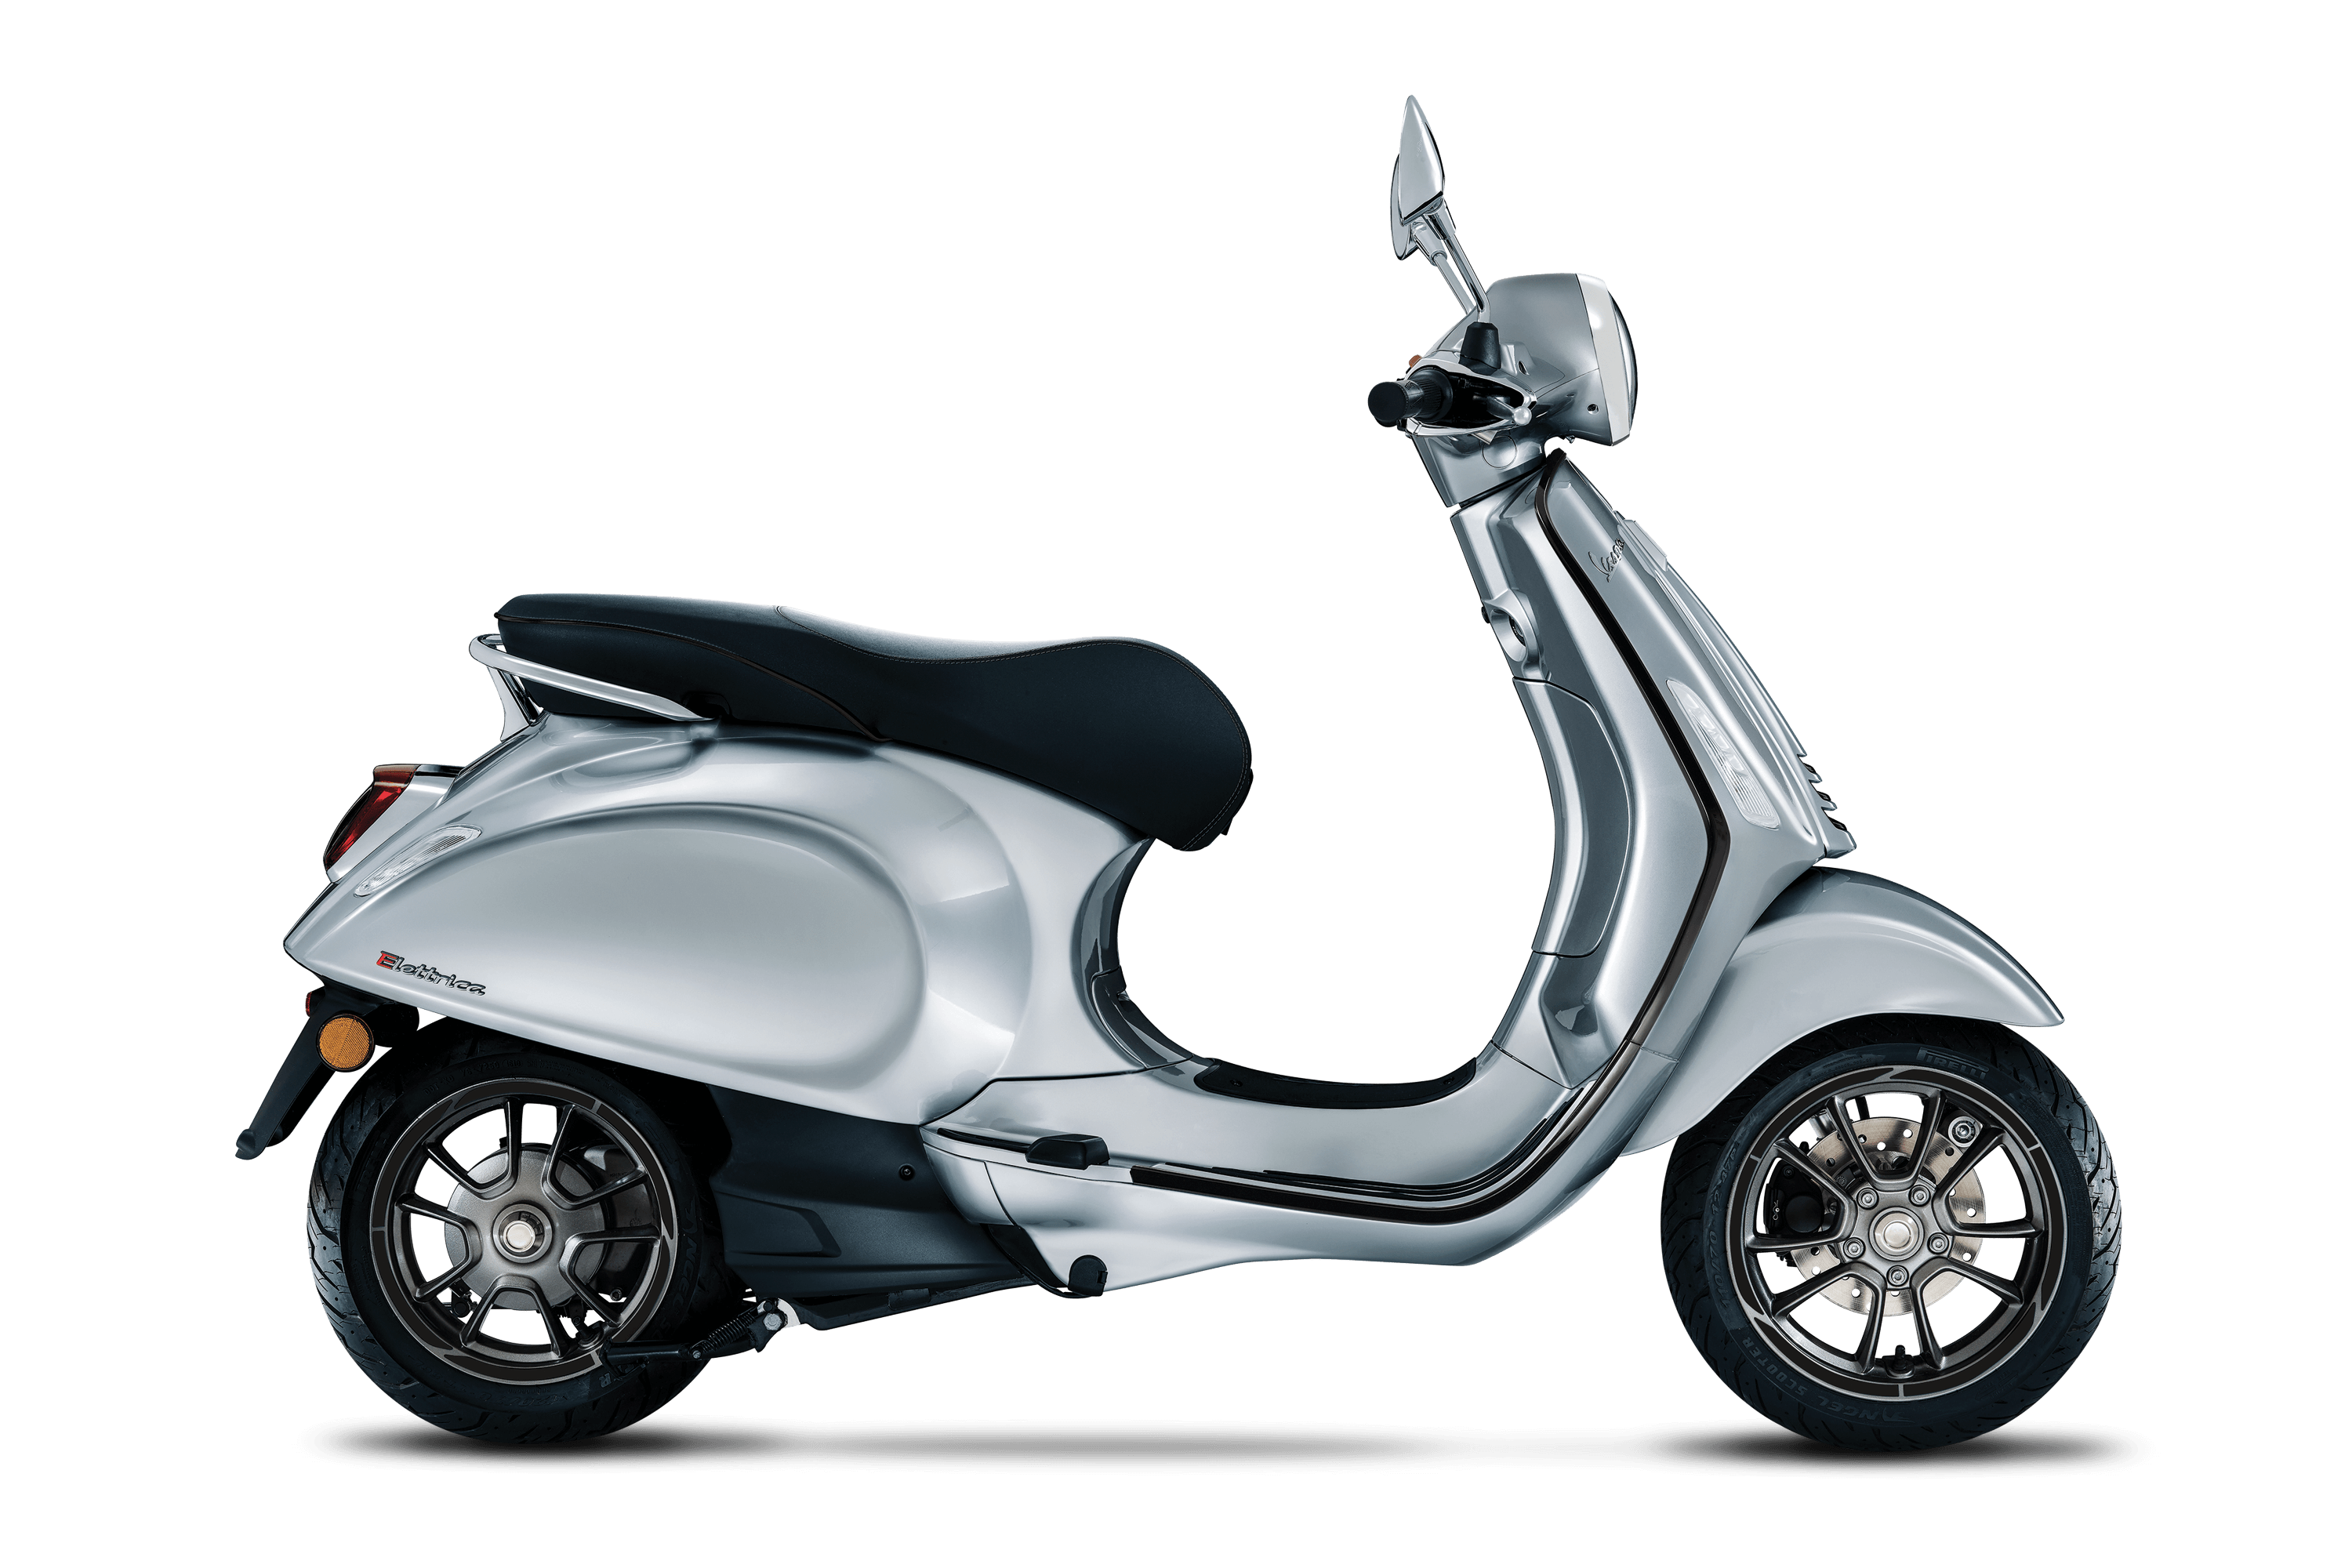 Vespa Elettrica 70 km/h specs, features and price